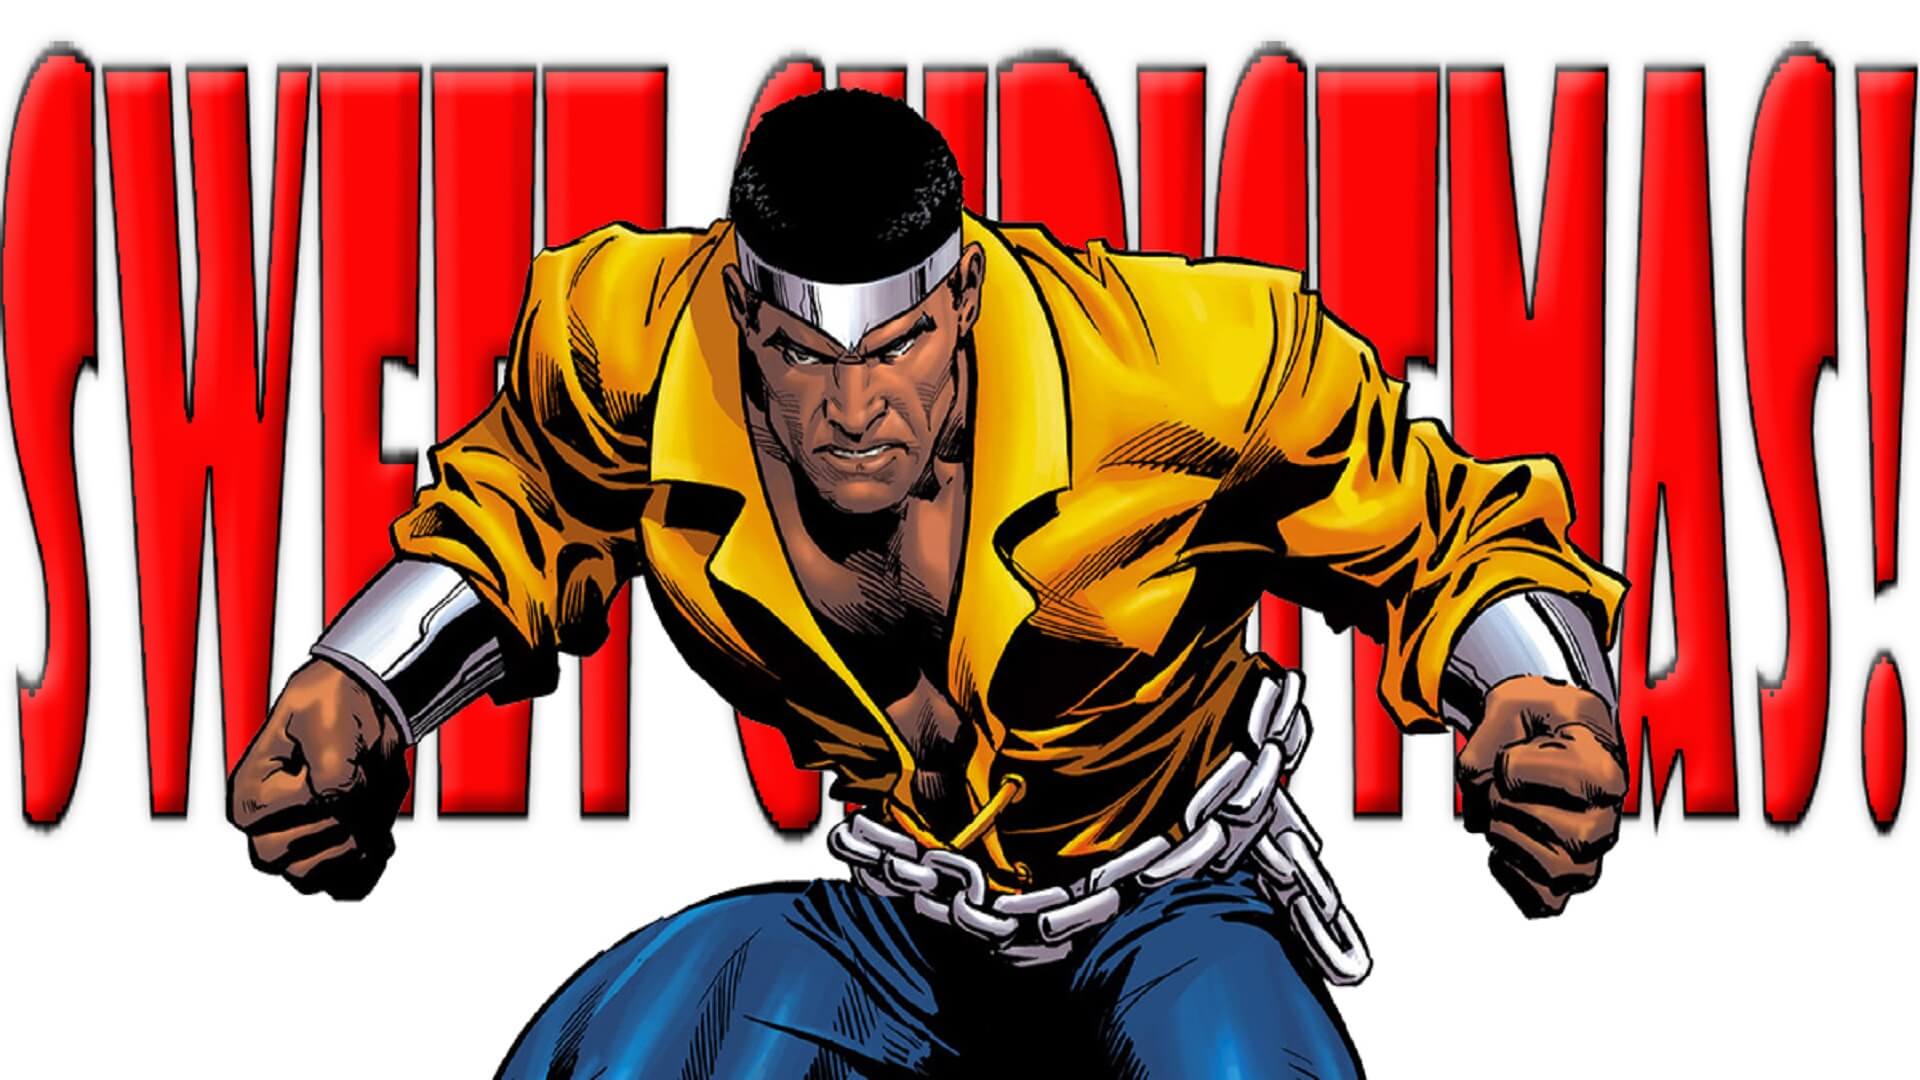 Luke Cage Gets A New Ongoing Comic Book Series